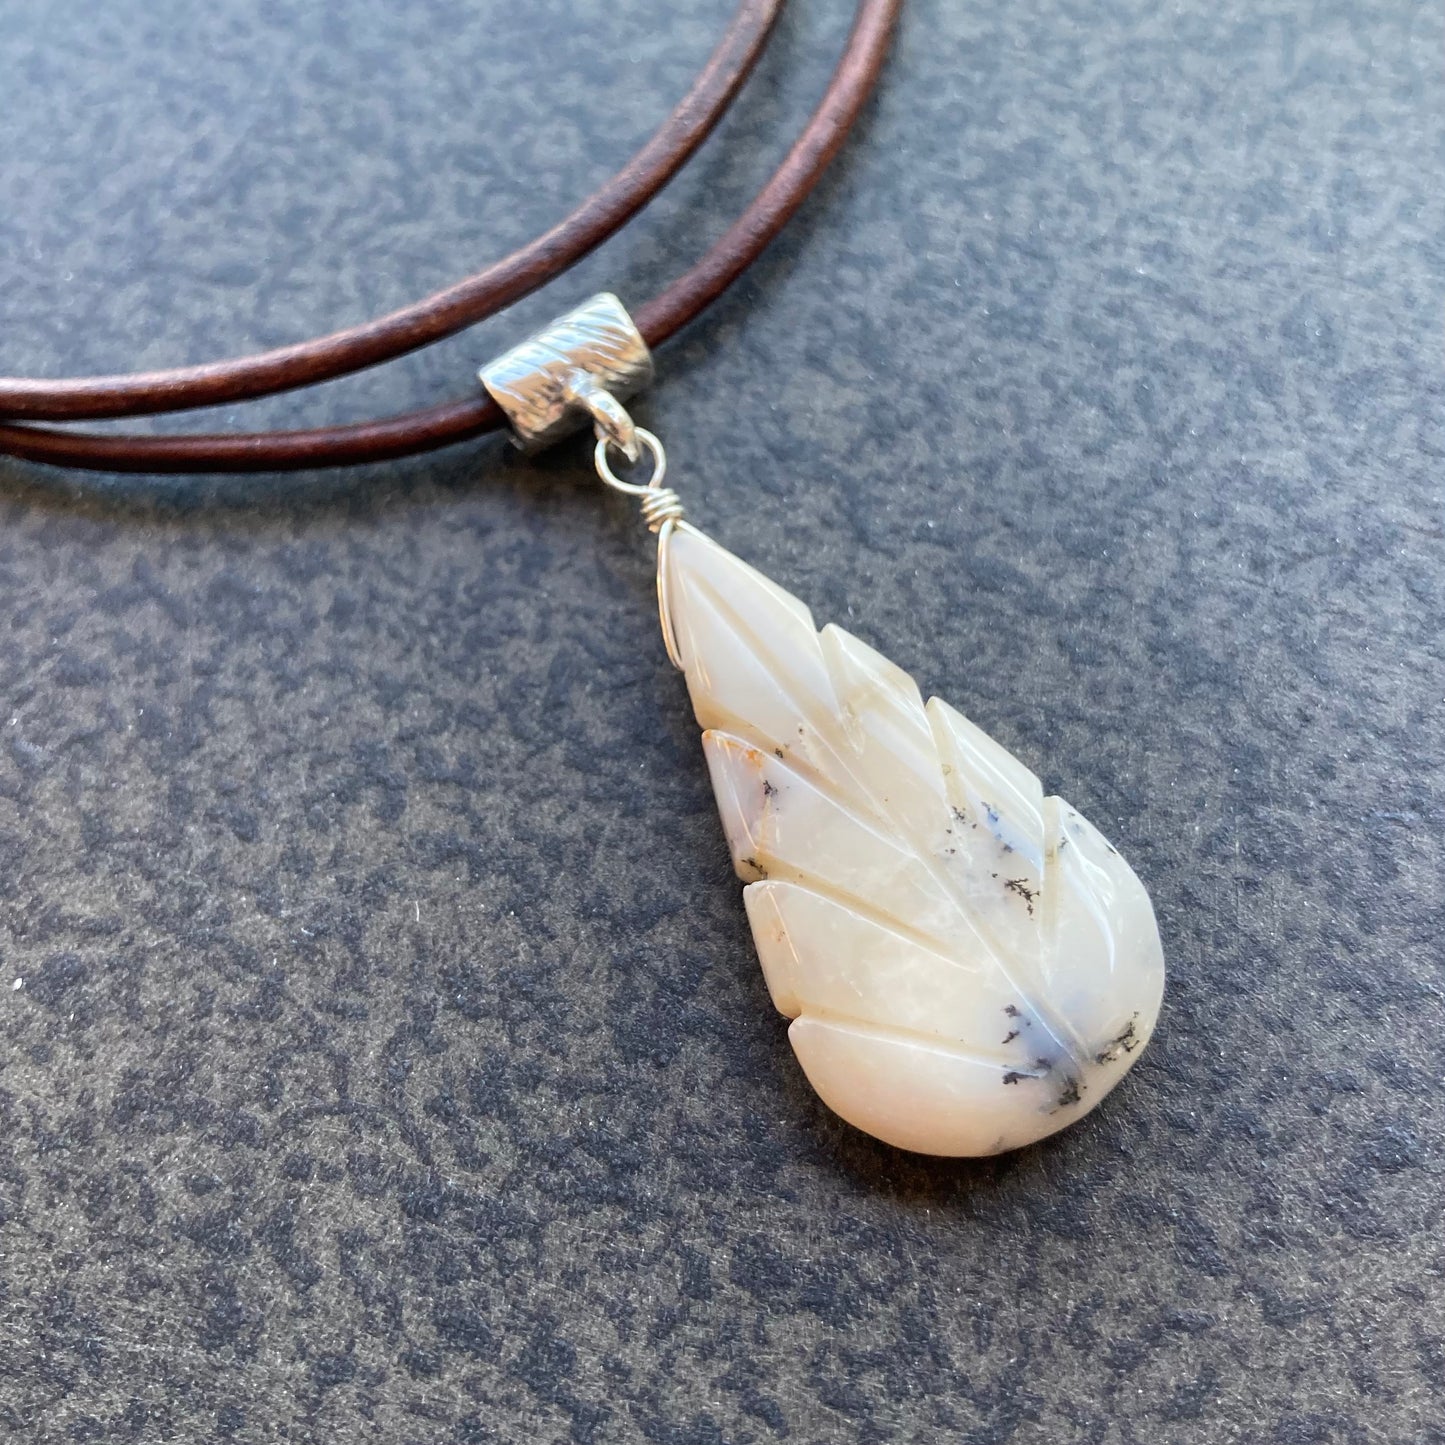 Dendritic Opal Carved Leaf & Sterling Silver Leather Choker